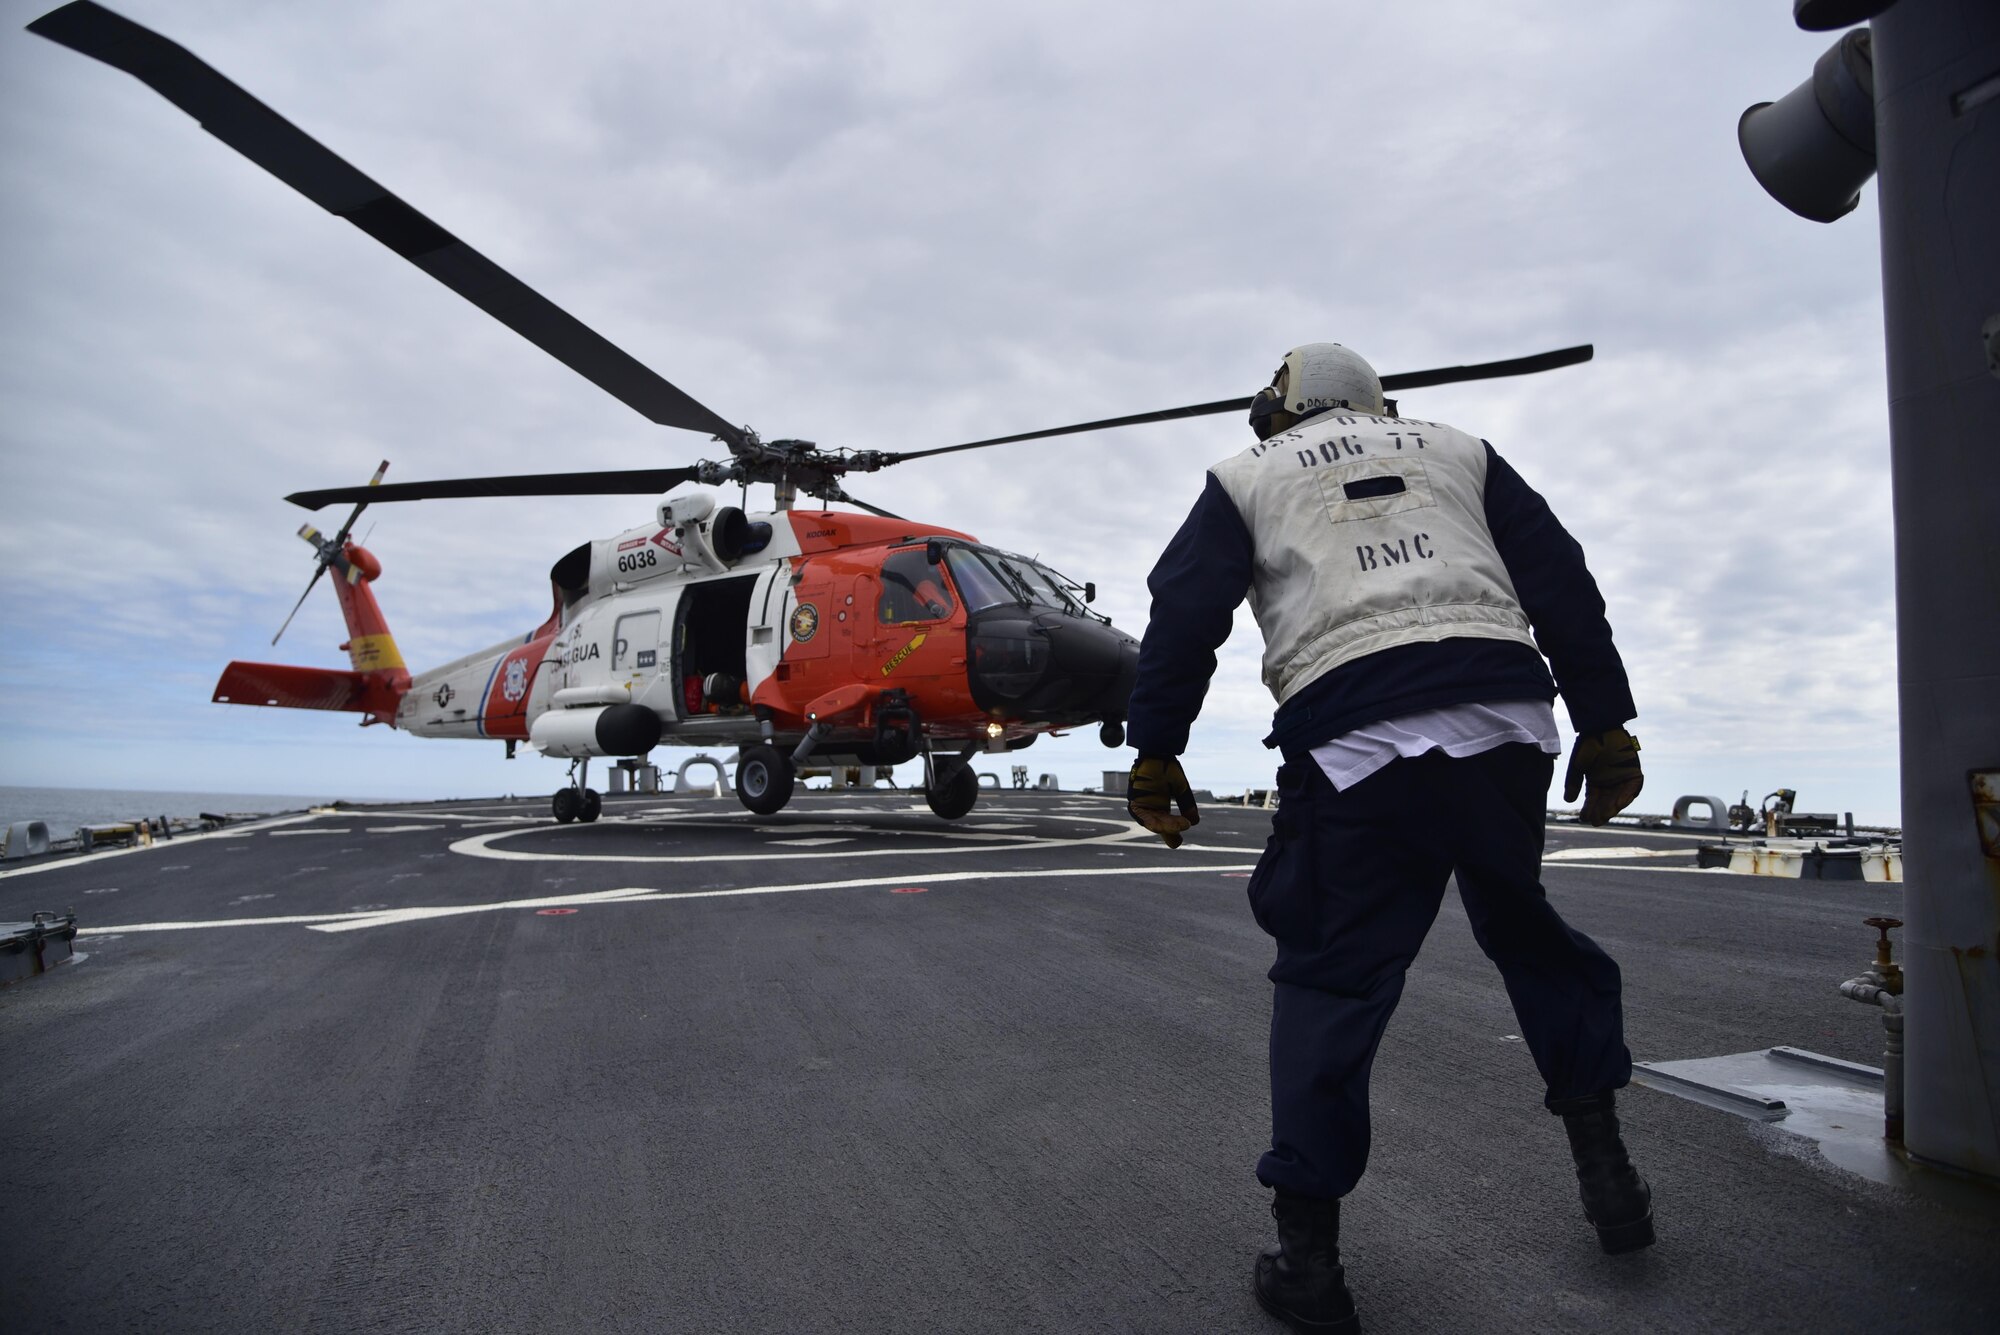 A Chief Boatswain's Mate assigned to Arleigh Burke-class guided missile destroyer USS O'Kane (DDG 77) observes a U.S. Coast Guard MH-60T Jayhawk helicopter assigned to Air Station Kodiak, Alaska, landing during flight deck operations in the Gulf of Alaska. Northern Edge 2017 is Alaska's premiere joint-training exercise designed to practice operations, techniques, and procedures as well as enhance interoperability among the services. Thousands of participants from all the services; Sailors, Soldiers, Airmen, Marines, and Coast Guard personnel from active duty, Reserve and National Guard units, are involved.